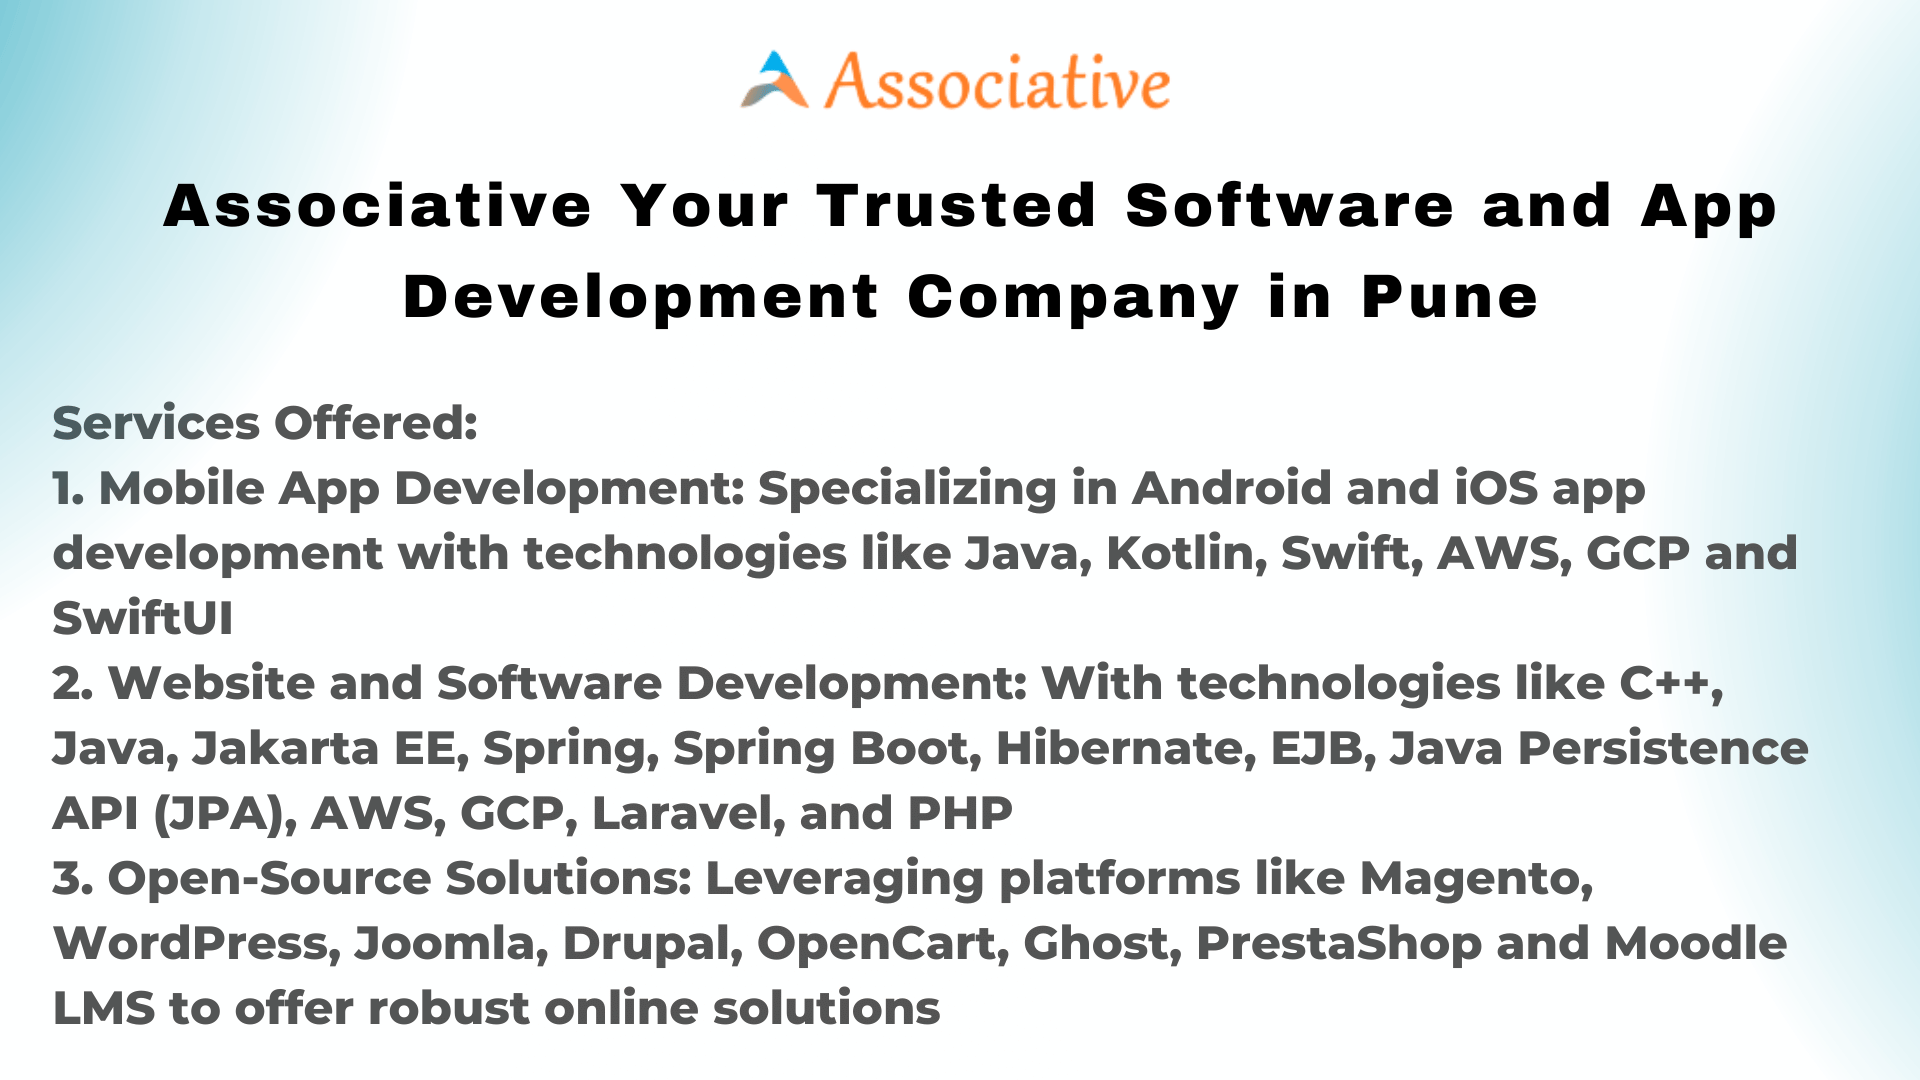 Associative Your Trusted Software and App Development Company in Pune